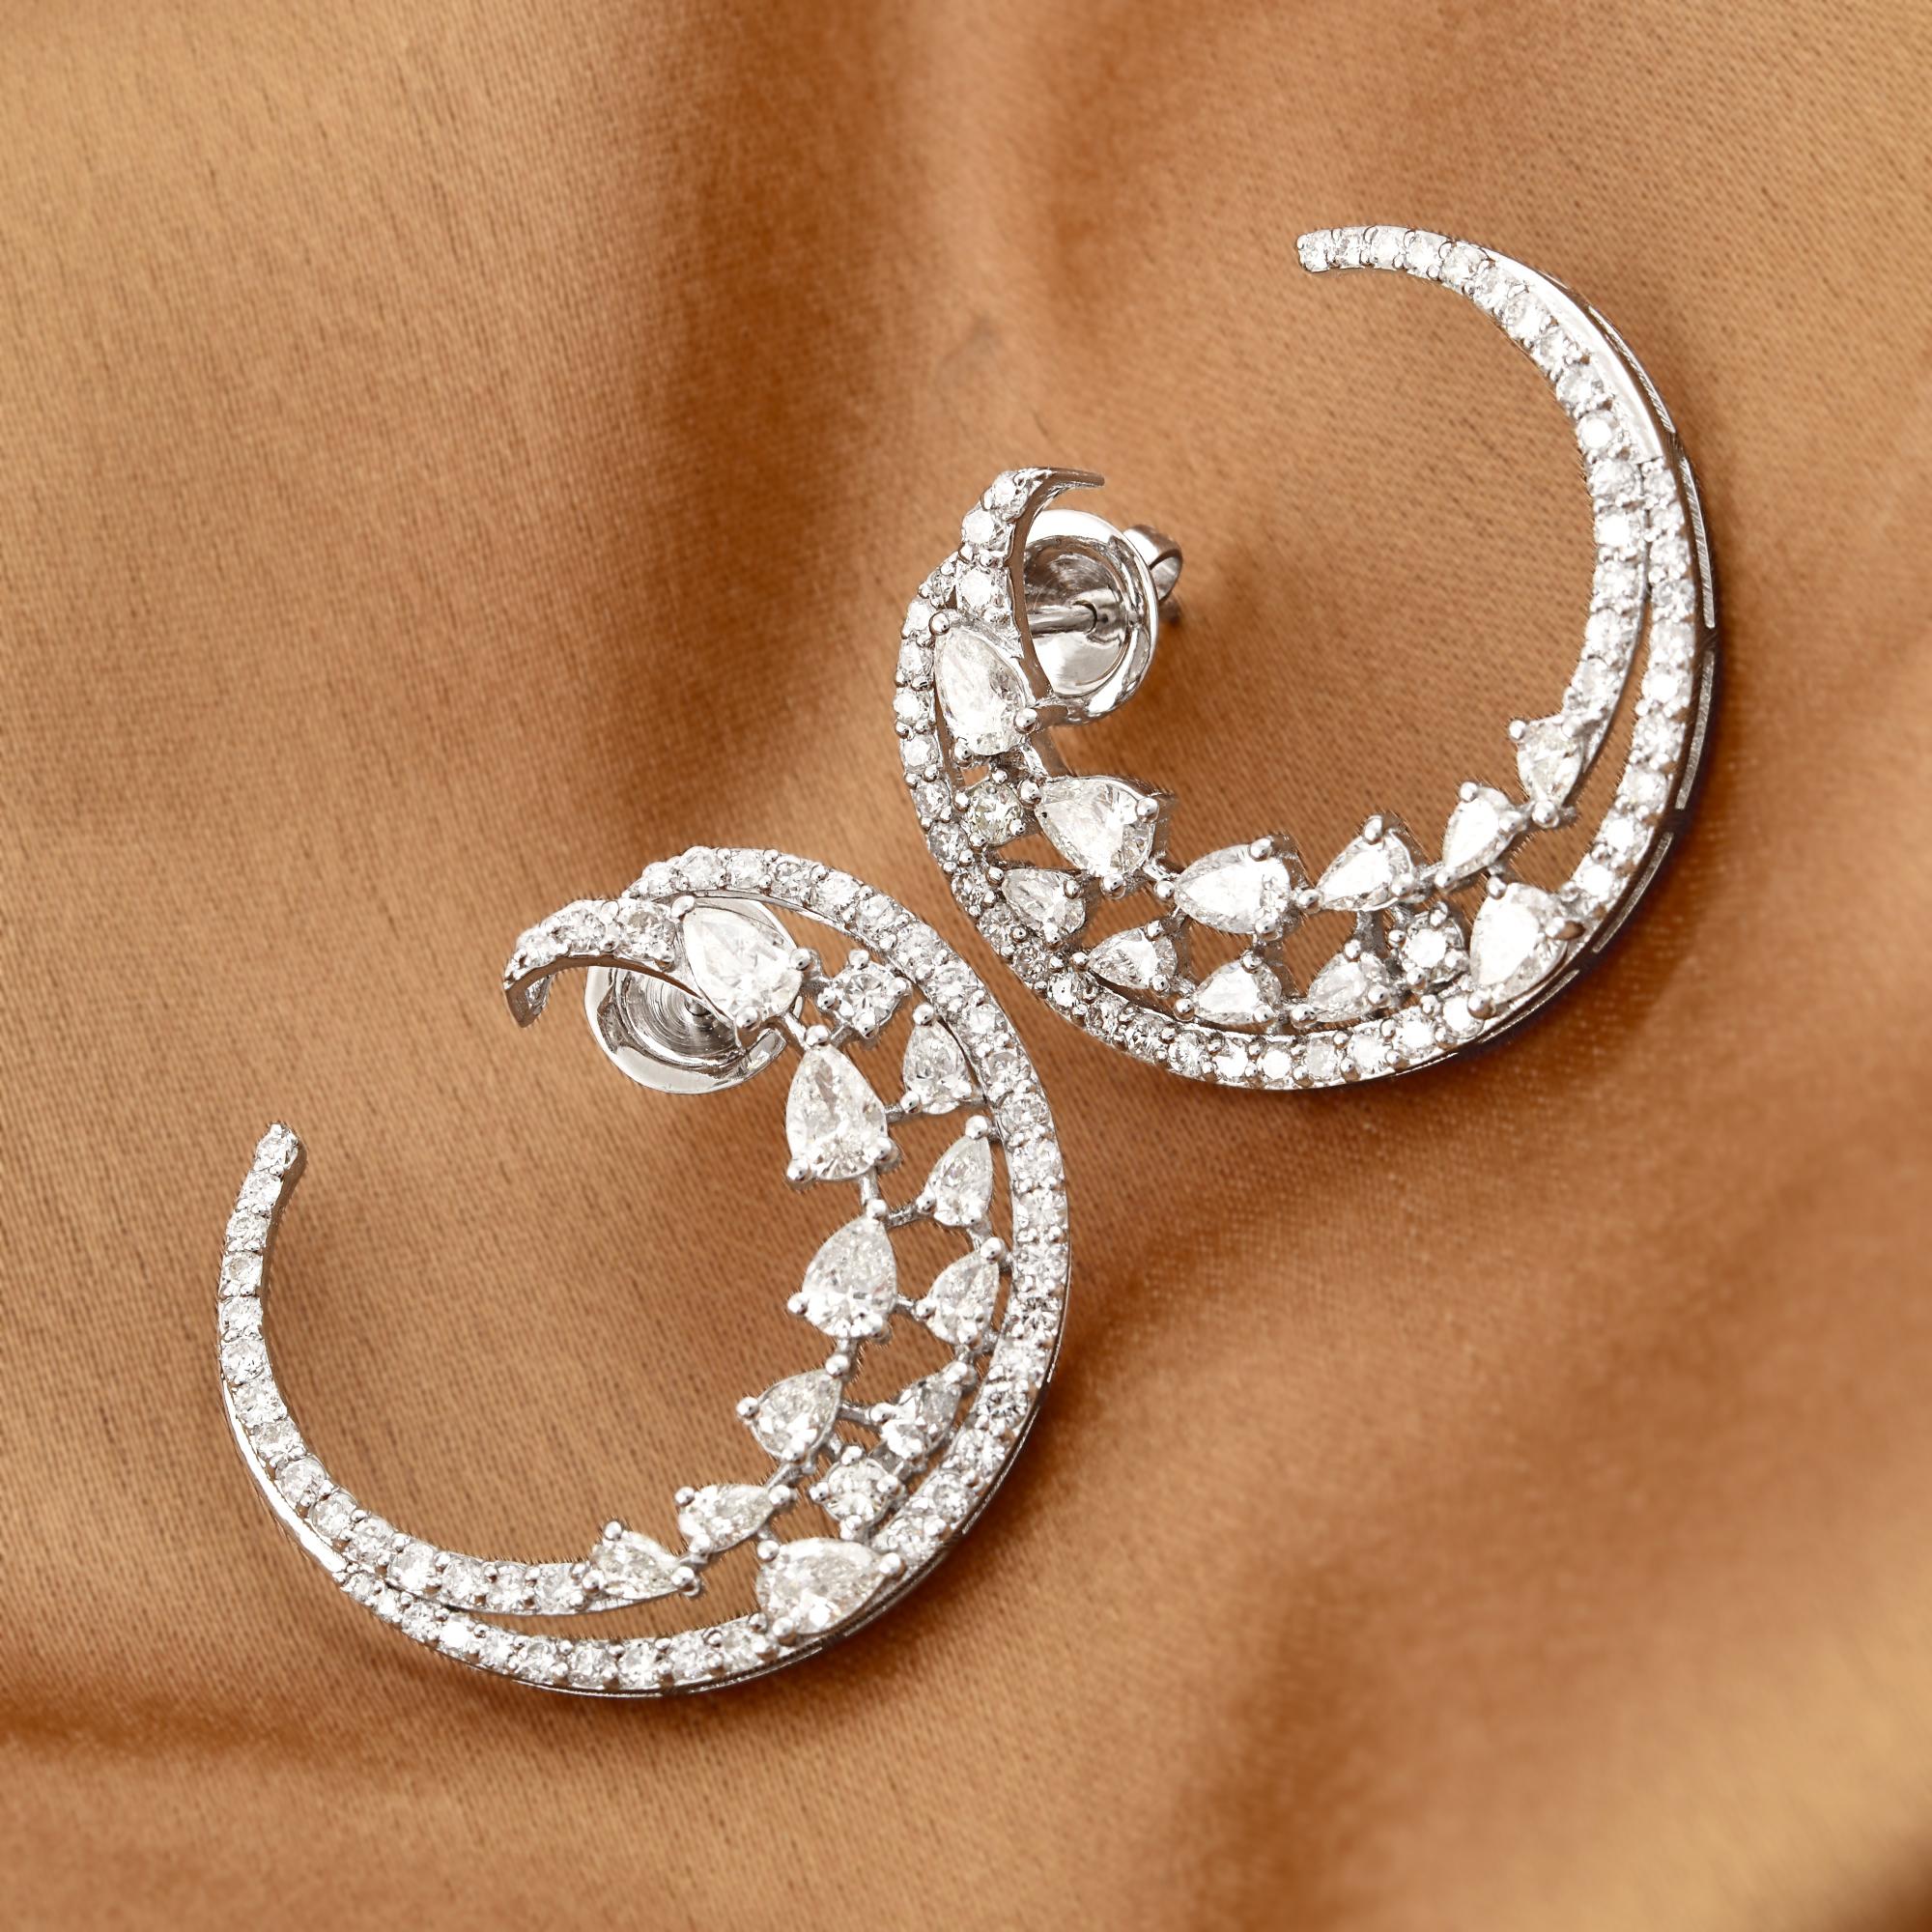 Item Code :- SEE-11922
Gross Weight :- 8.59 gm
Solid 18k White Gold Weight :- 7.94 gm
Natural Diamond Weight :- 3.25 carat  ( AVERAGE DIAMOND CLARITY SI1-SI2 & COLOR H-I )
Earrings Size :- 27x22 mm approx.

✦ Sizing
.....................
We can